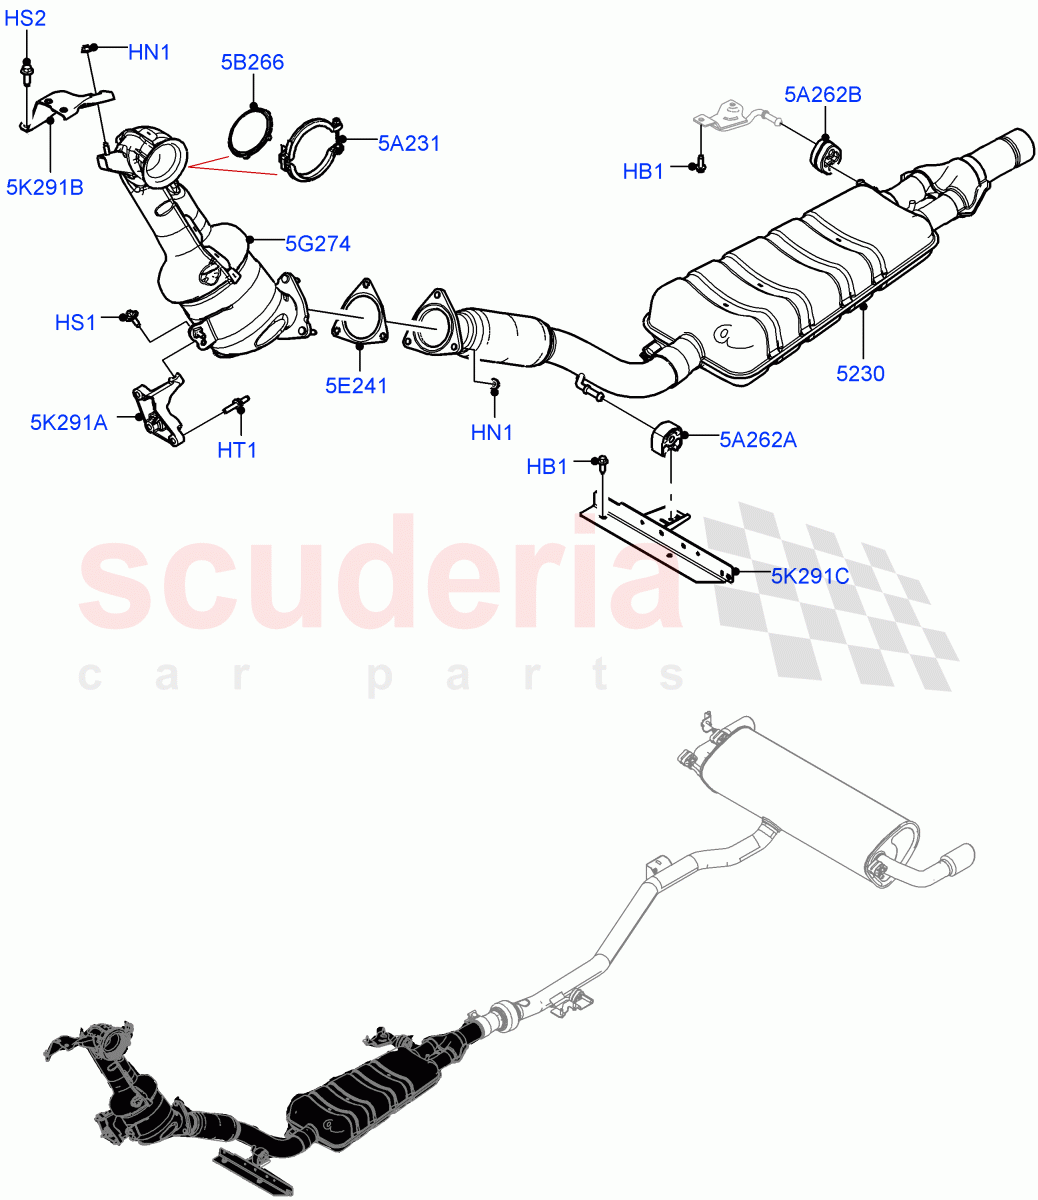 Front Exhaust System(2.0L I4 DSL MID DOHC AJ200,Euro Stage 4 Emissions,2.0L I4 DSL HIGH DOHC AJ200)((V)FROMHH000001) of Land Rover Land Rover Discovery Sport (2015+) [2.0 Turbo Diesel]